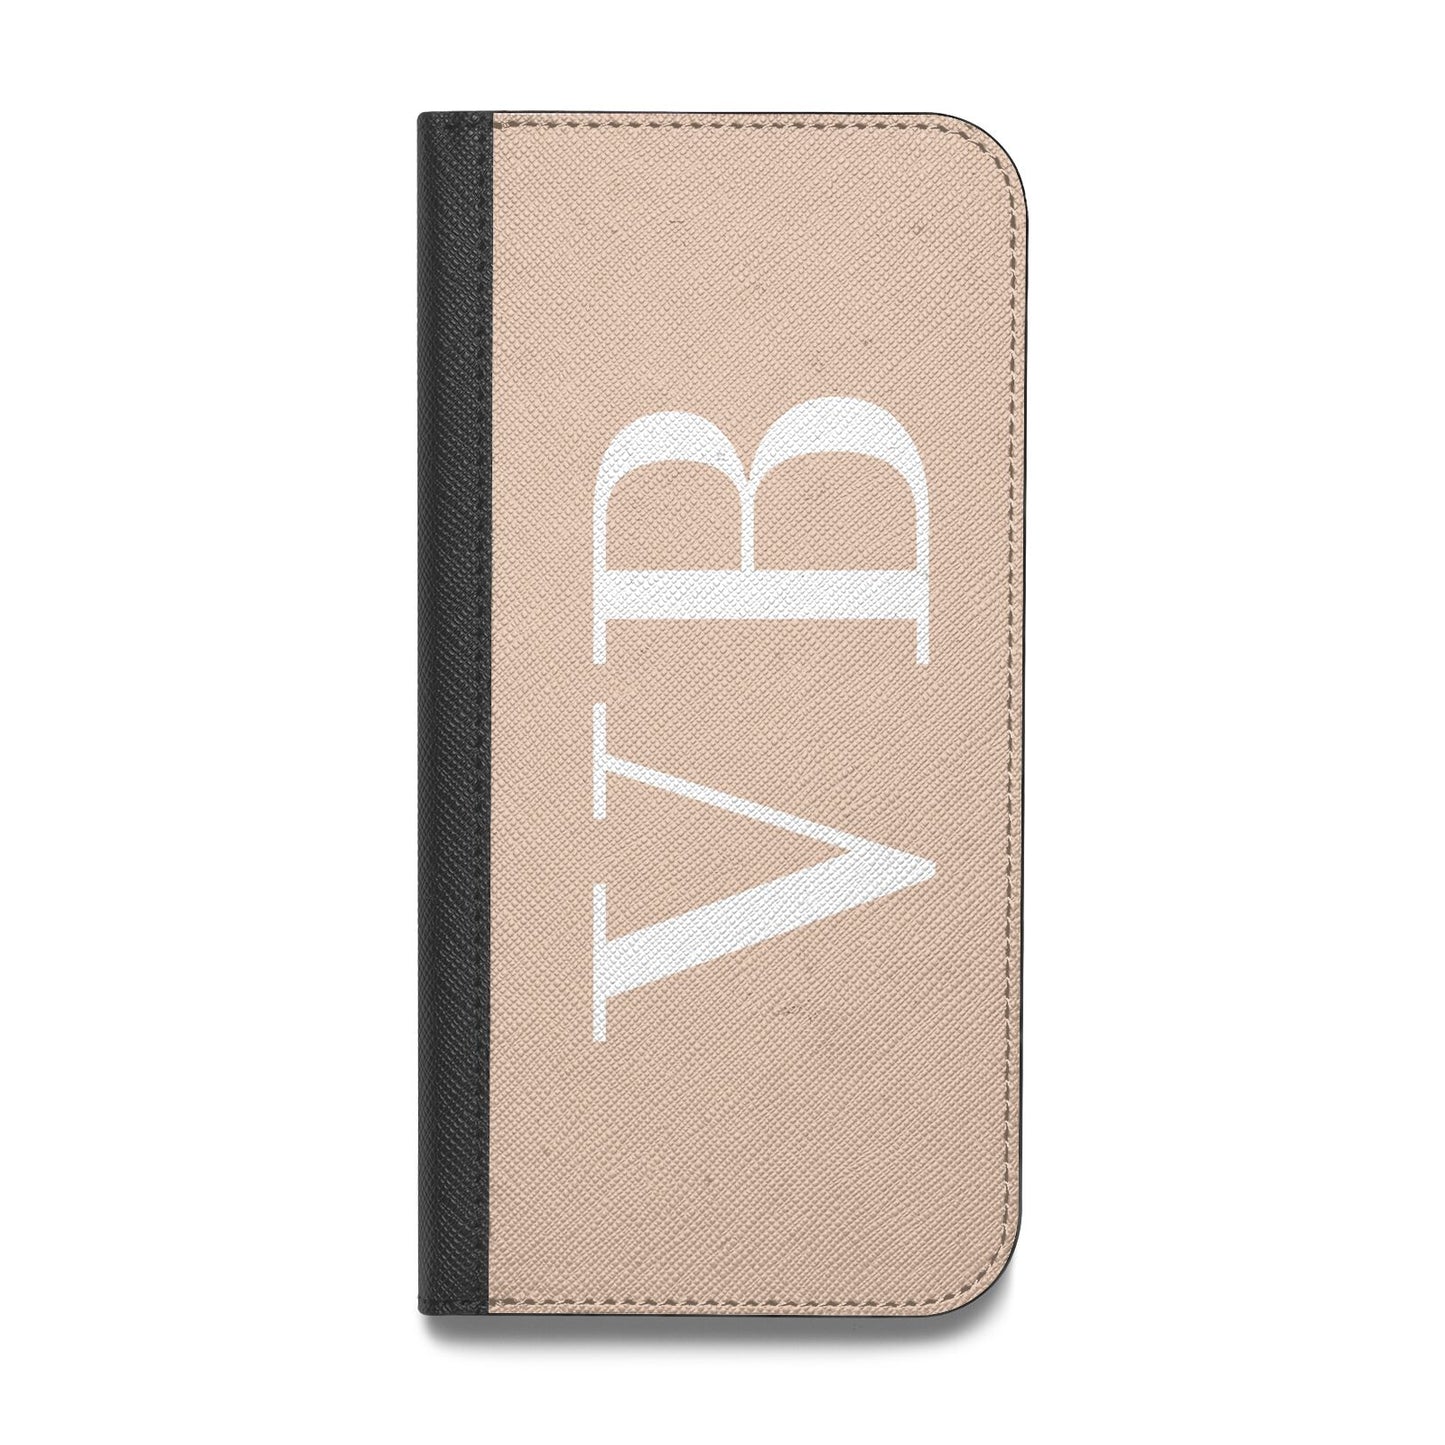 Nude And White Personalised Vegan Leather Flip iPhone Case